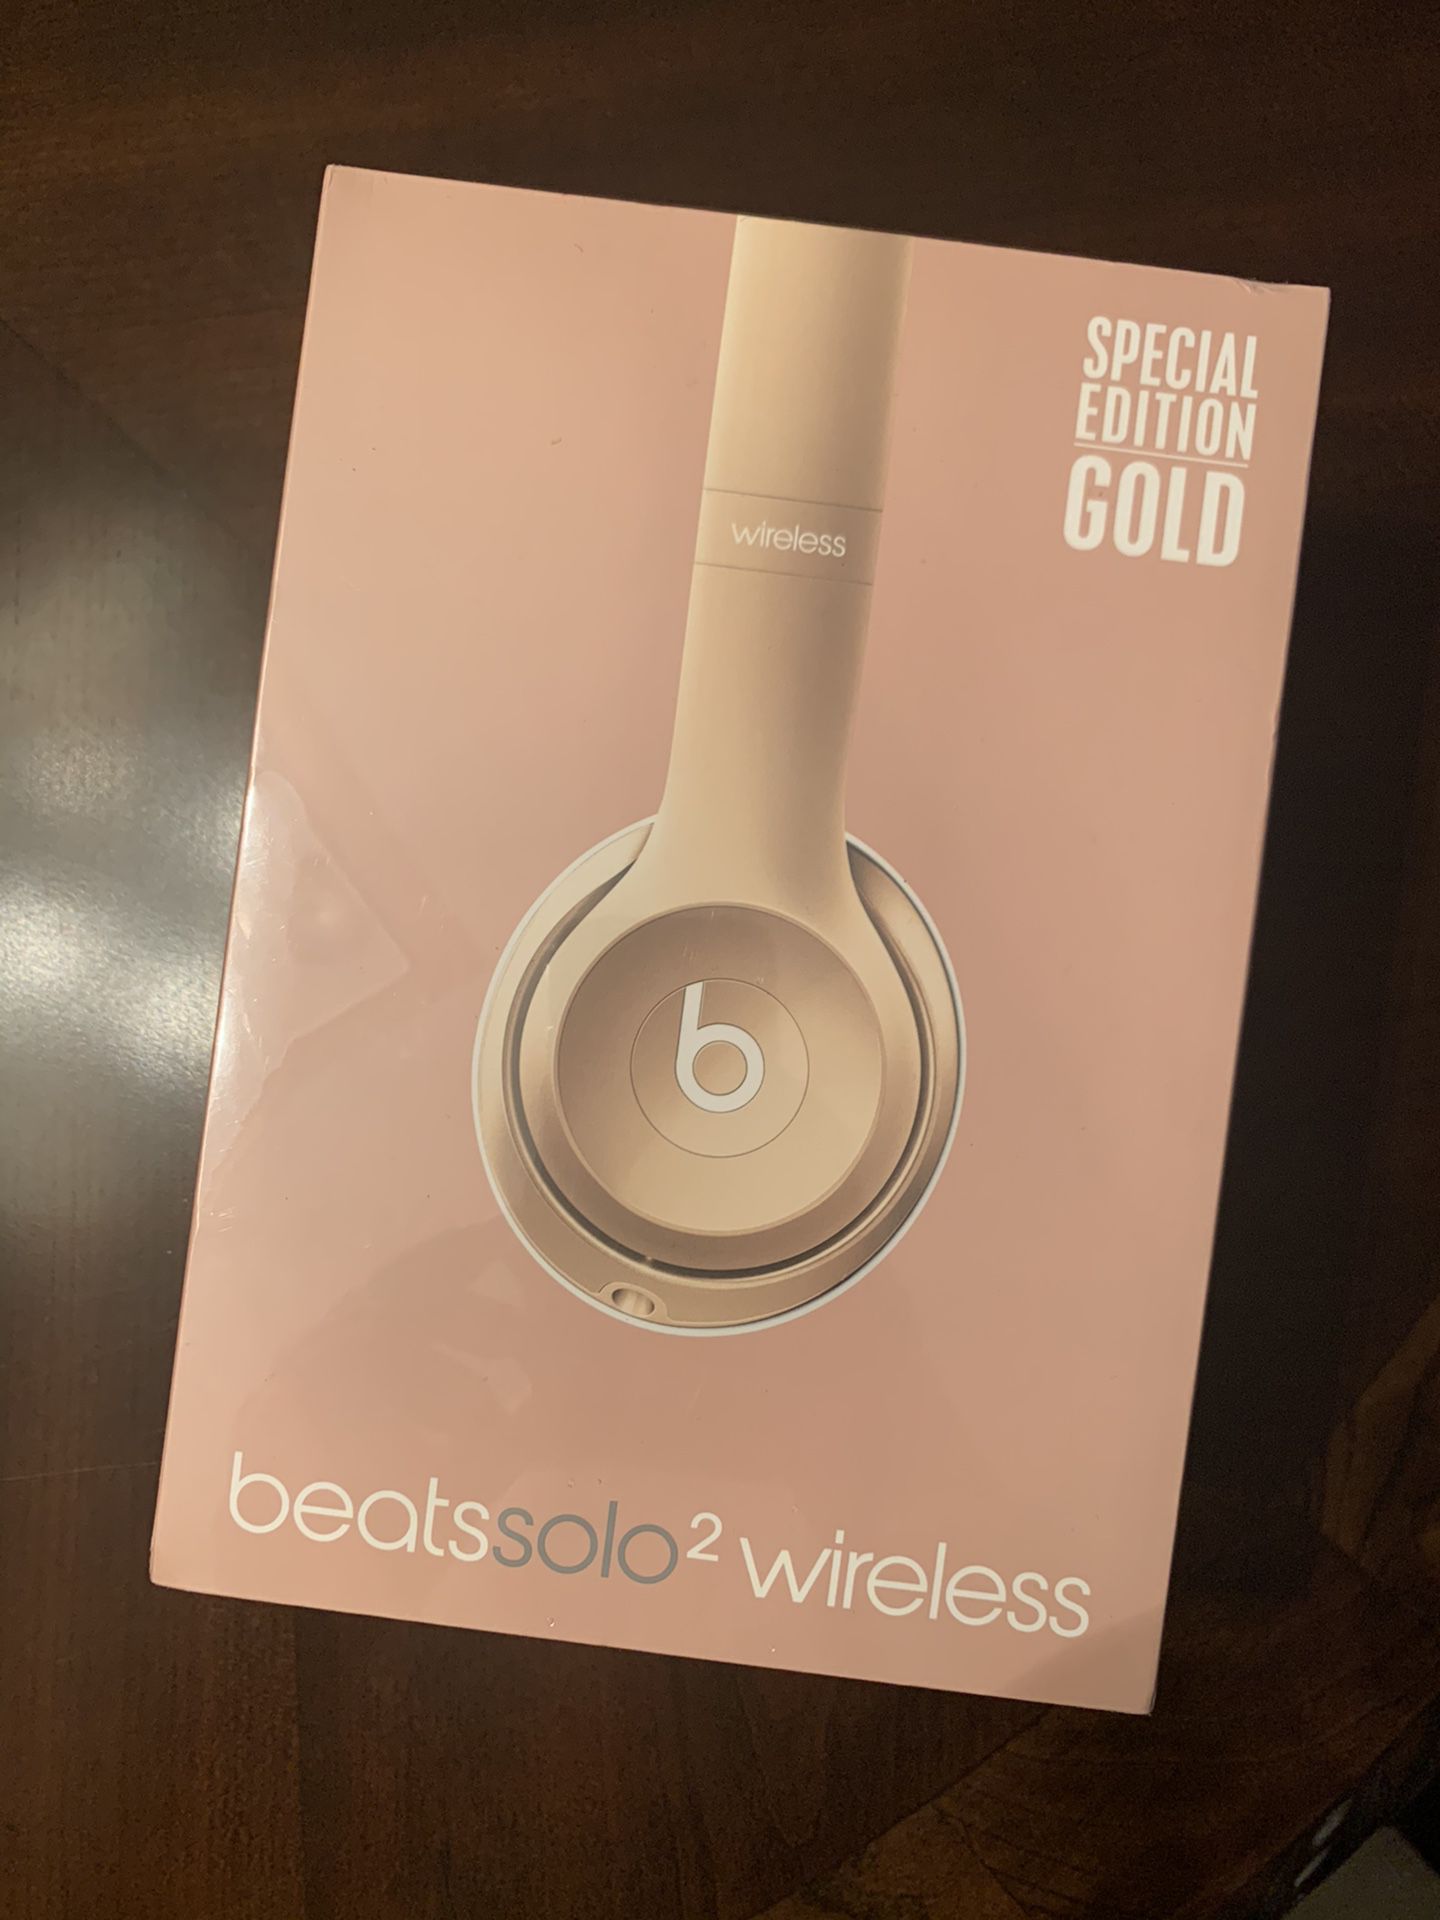 Beats solo 2 gold special edition